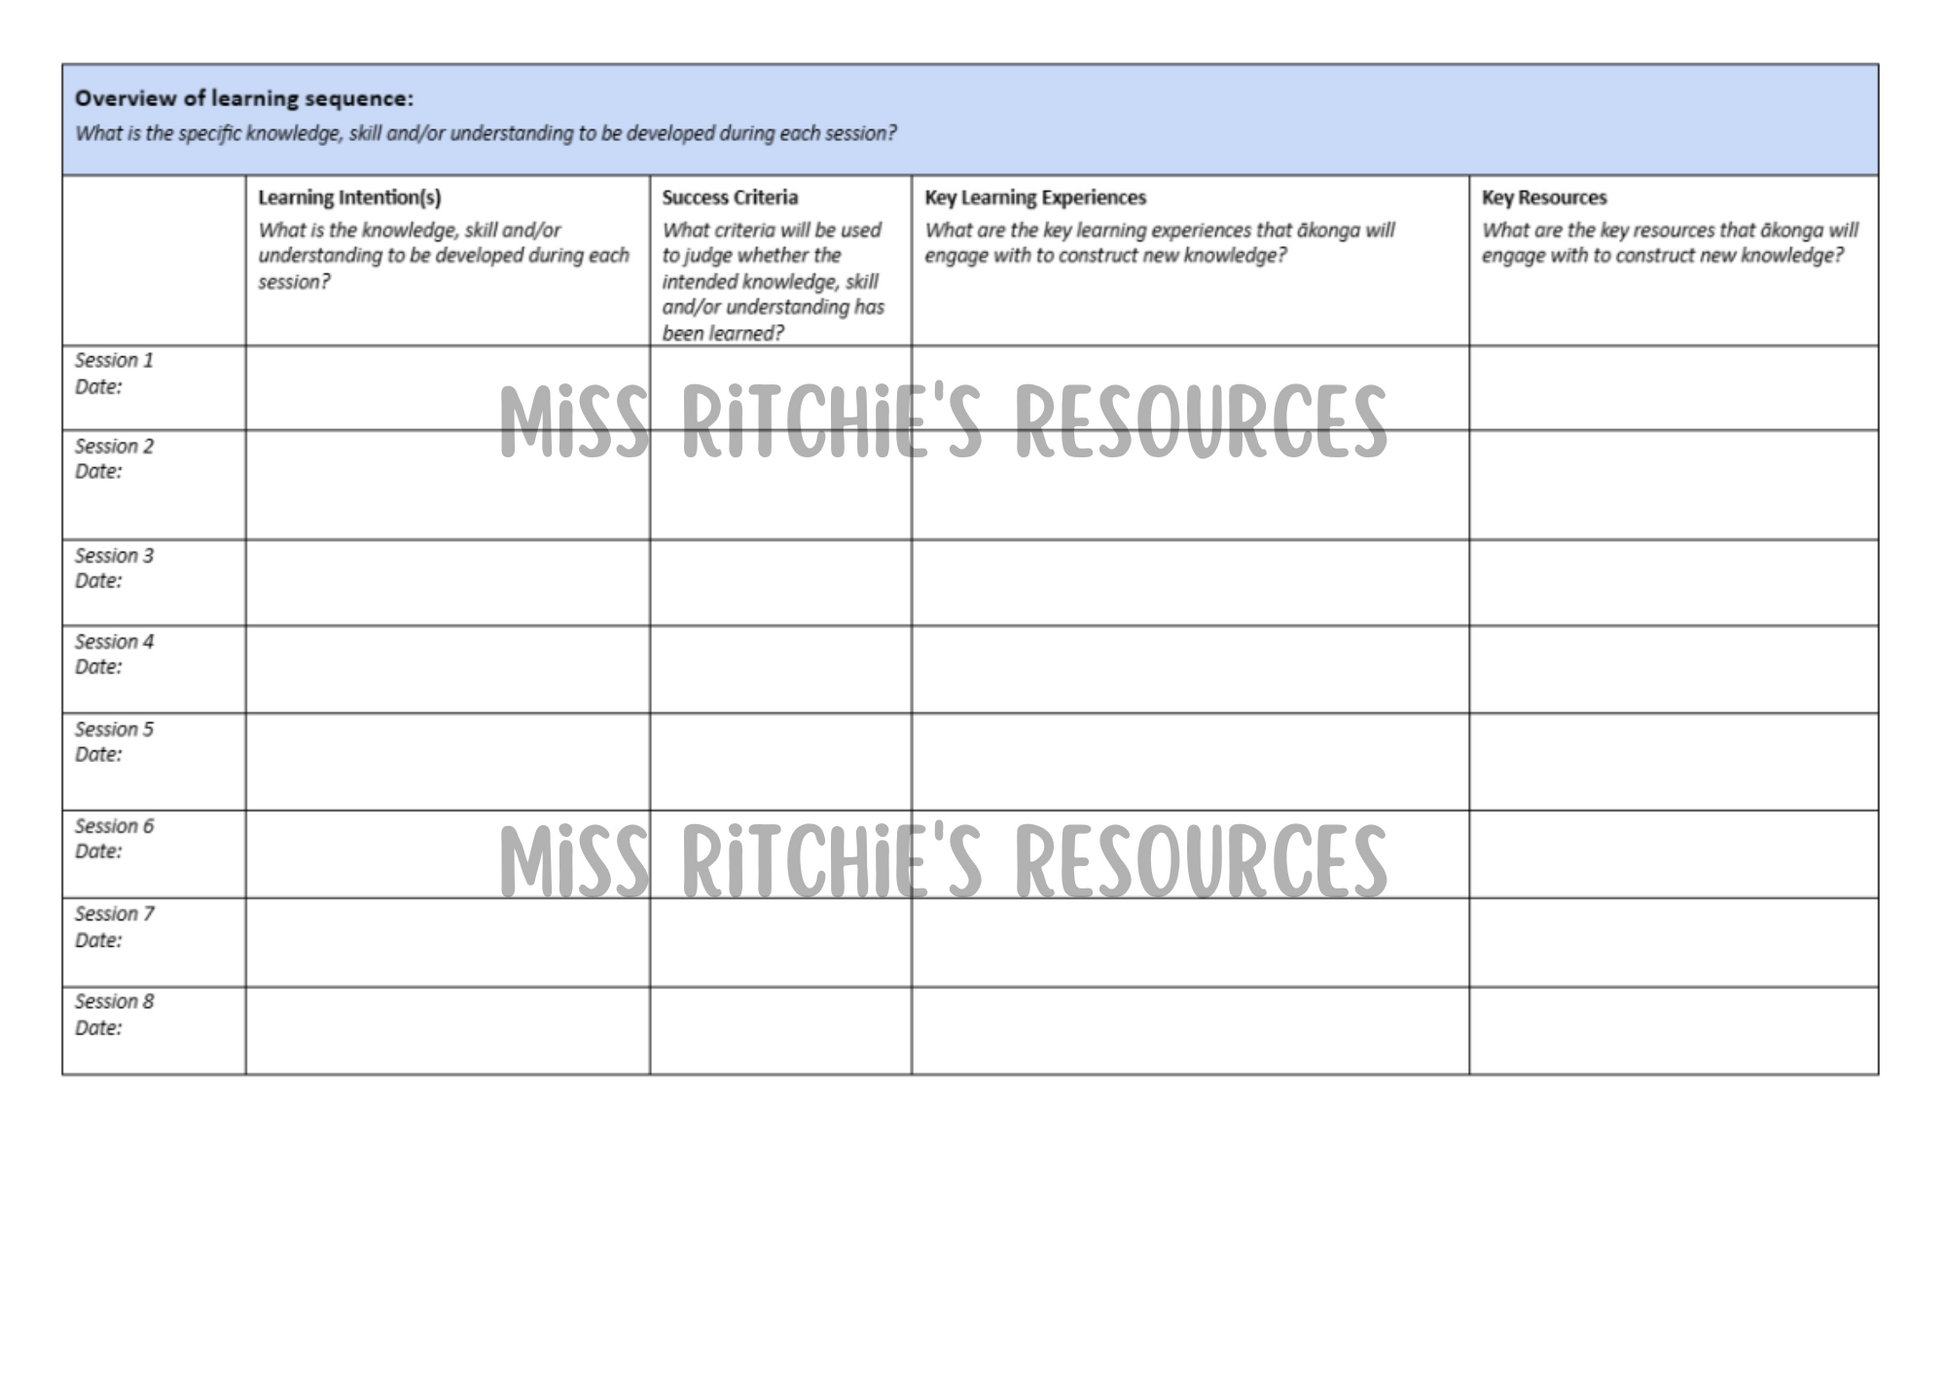 Weekly/unit planning. Adaptable to your own needs. Sets a high standard for teaching and learning.